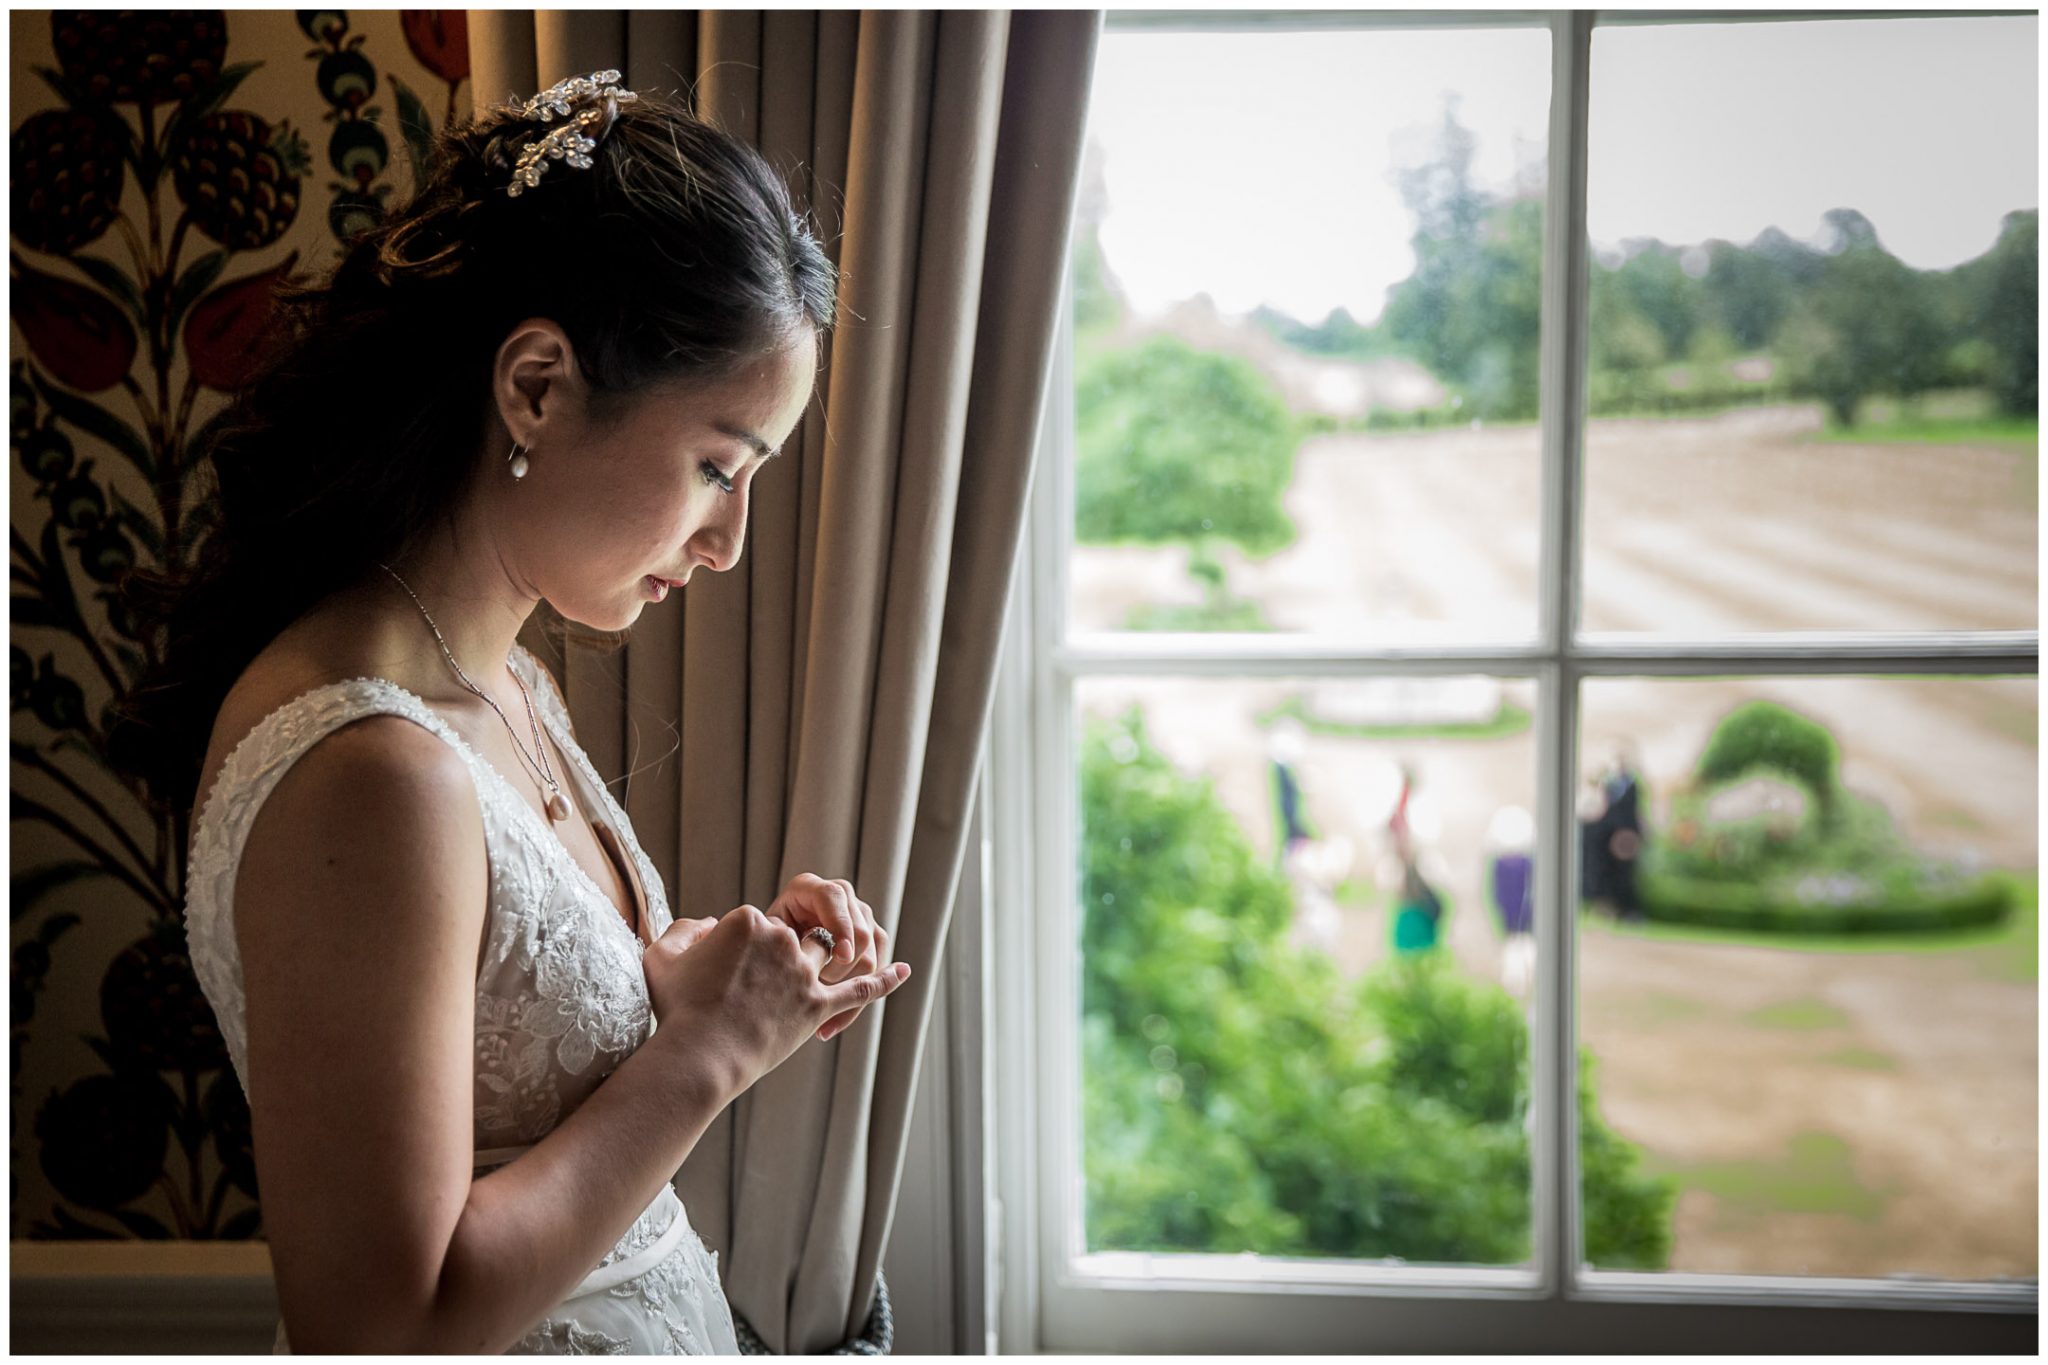 The bride takes a quiet moment for reflection as guests arrive outside